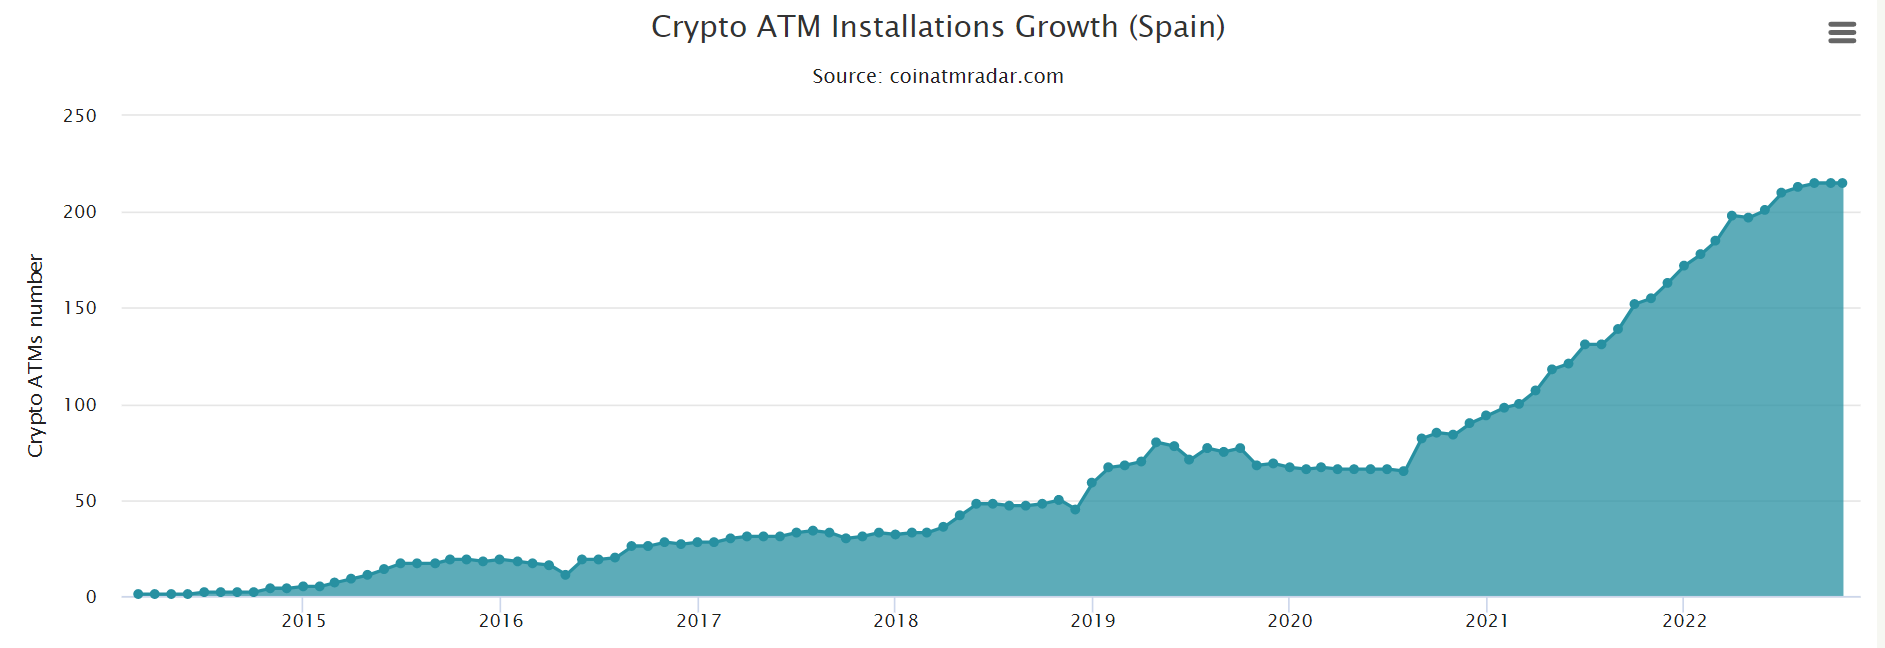 1666437010 921 Spain overtakes El Salvador to become third largest crypto ATM